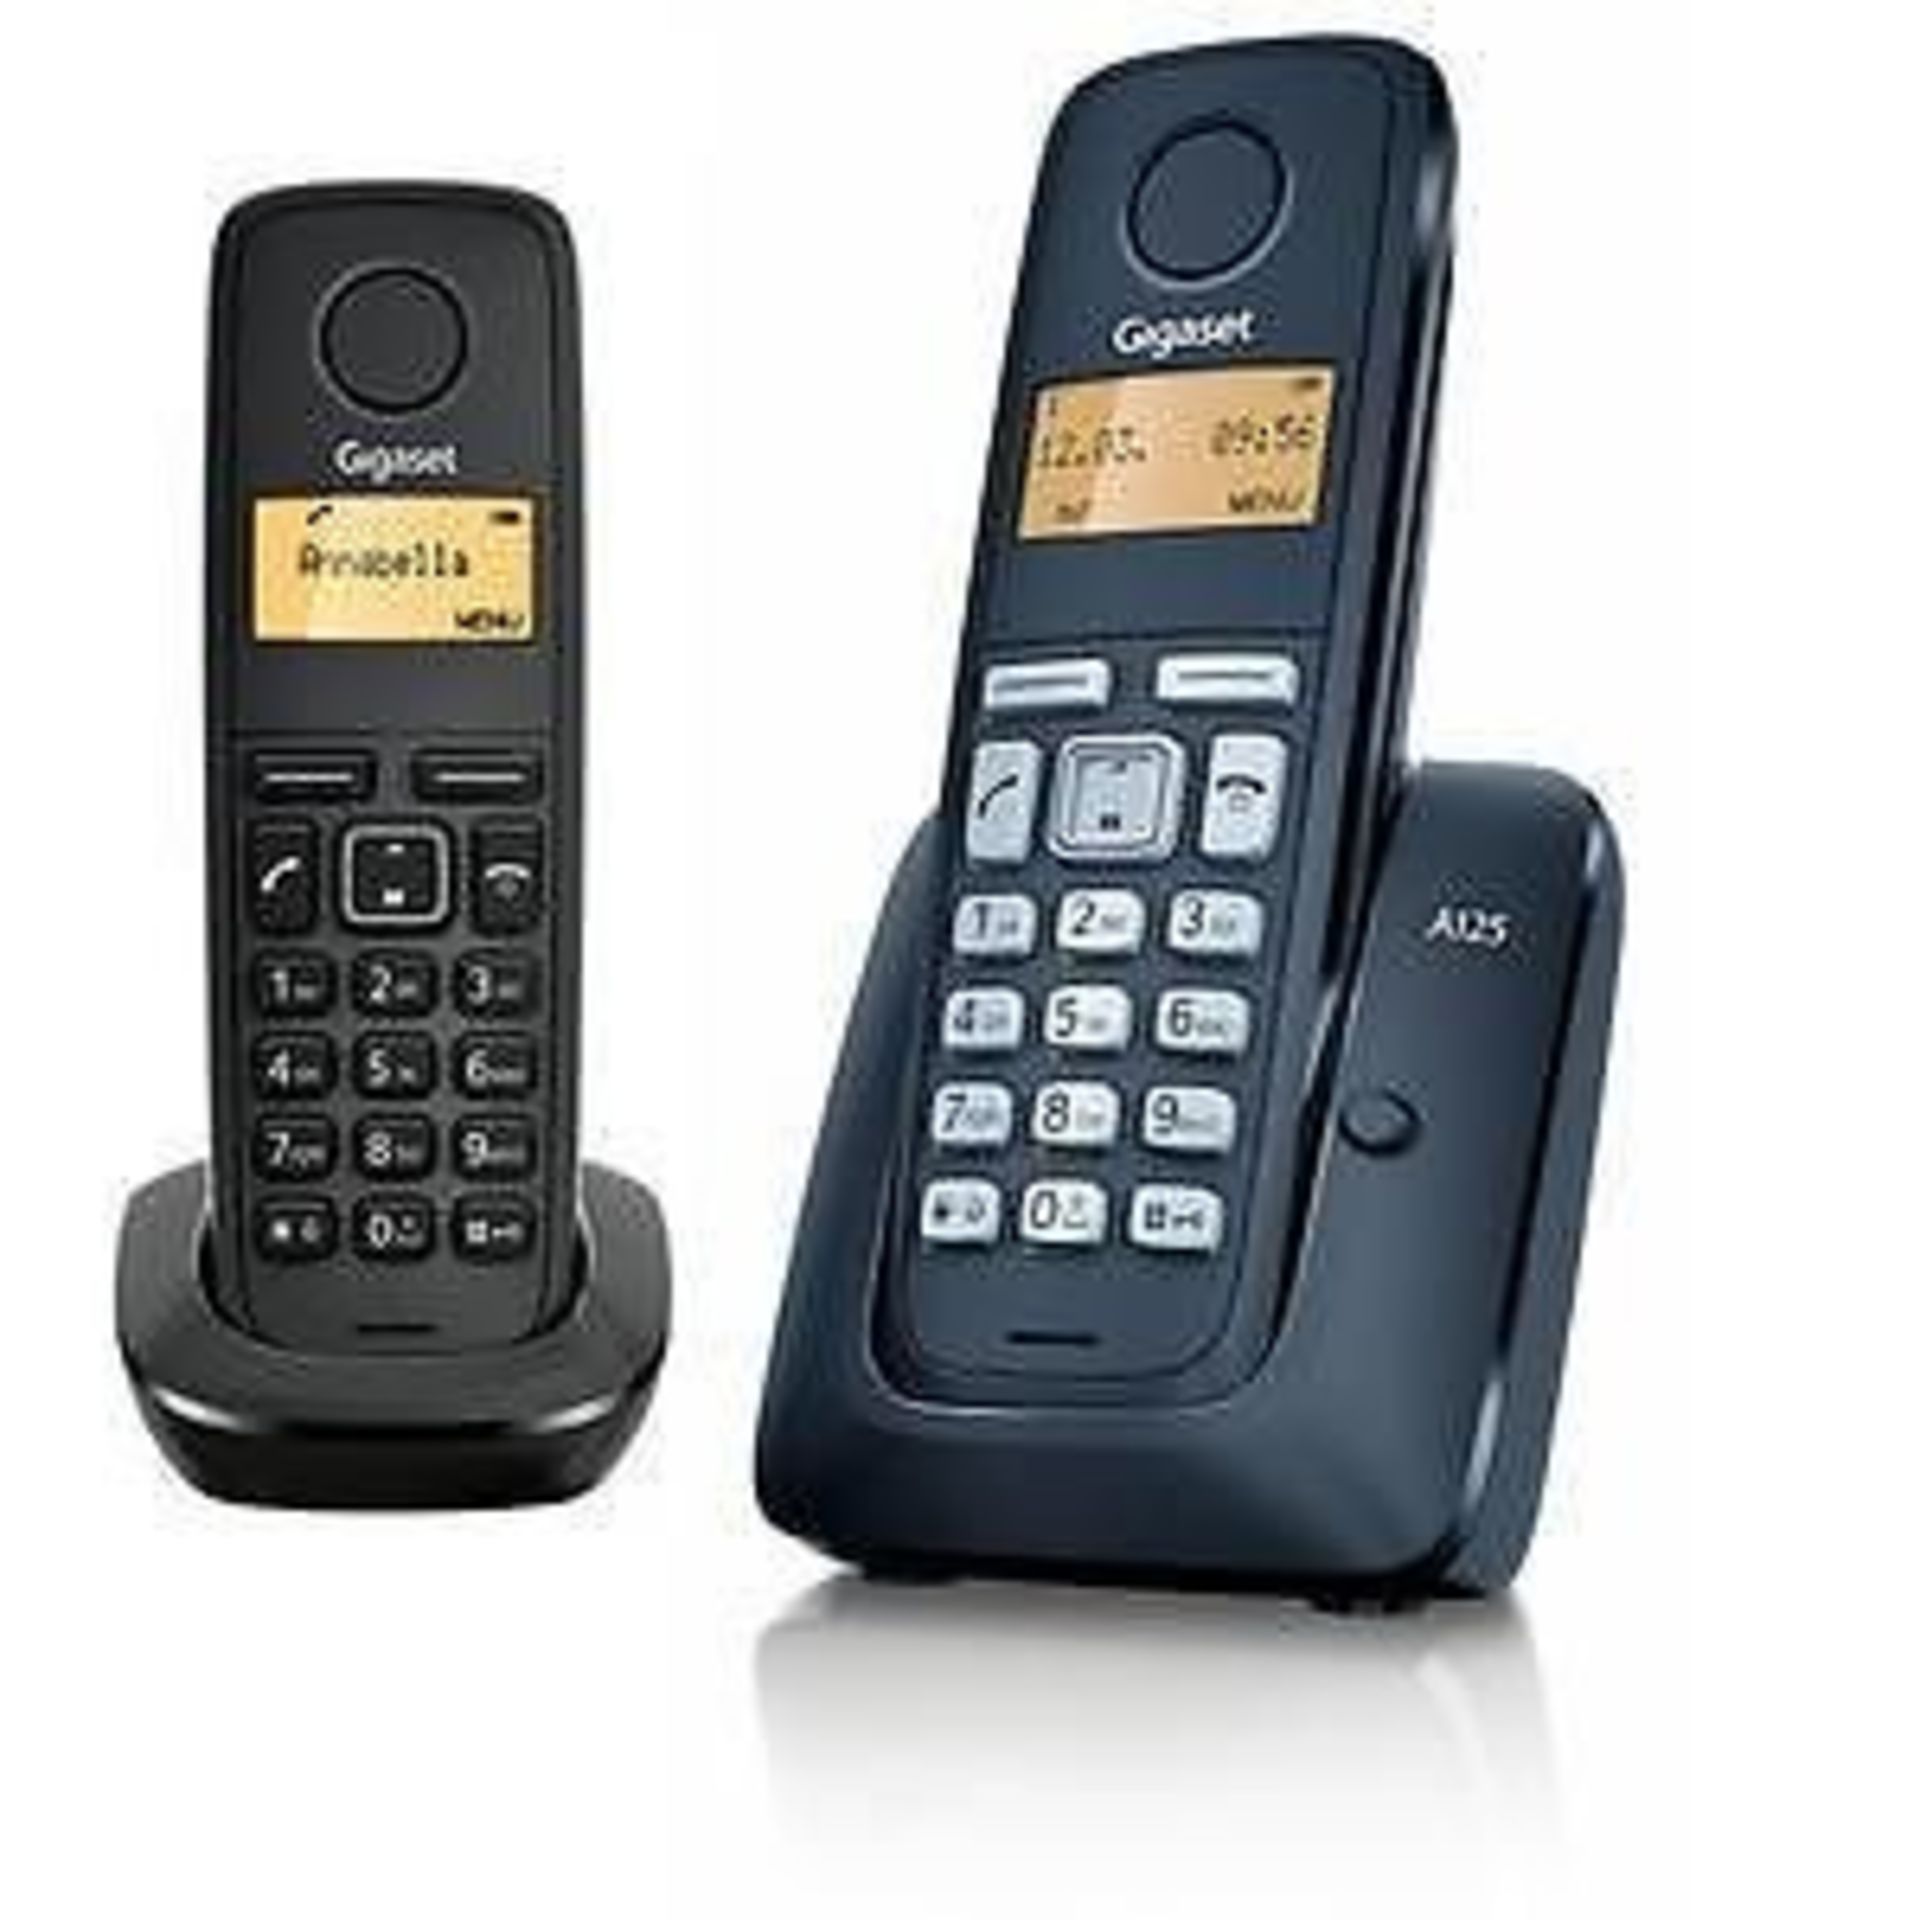 V Grade B Gigaset A125 Duo Cordless Phone System (Made in Germany) RRP 32.00